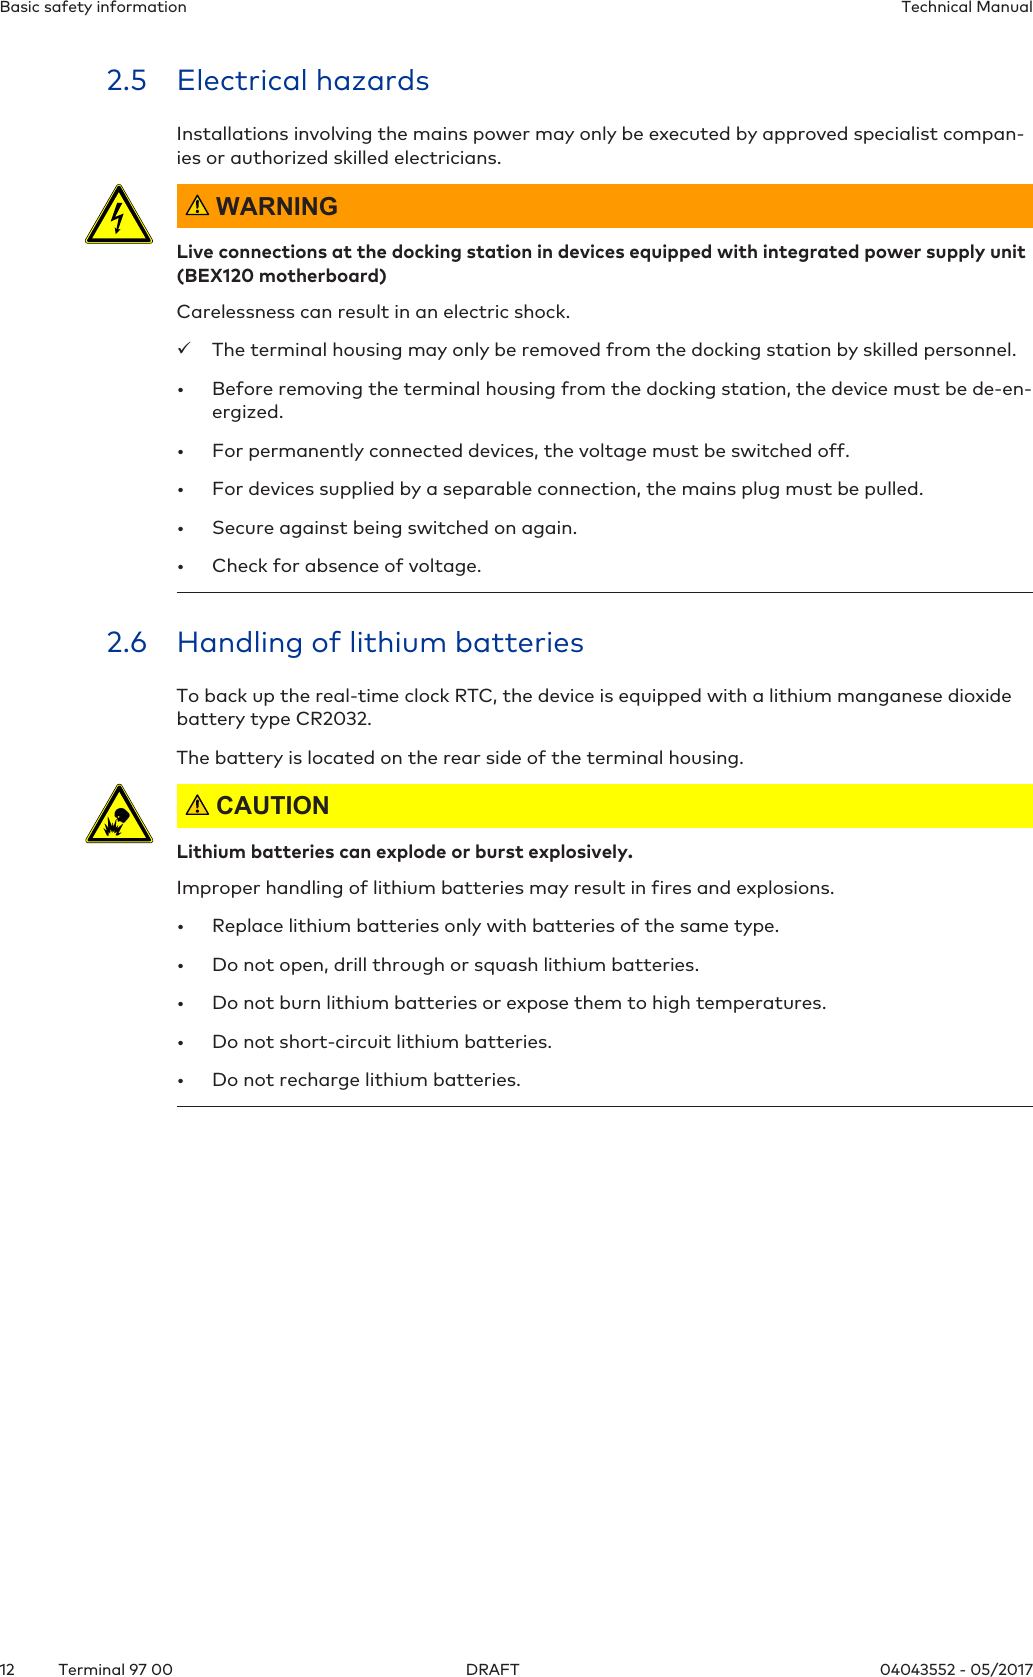 Basic safety information Technical Manual12 04043552 - 05/2017Terminal 97 00 DRAFT2.5 Electrical hazardsInstallations involving the mains power may only be executed by approved specialist compan-ies or authorized skilled electricians. WARNINGLive connections at the docking station in devices equipped with integrated power supply unit(BEX120 motherboard)Carelessness can result in an electric shock.üThe terminal housing may only be removed from the docking station by skilled personnel.• Before removing the terminal housing from the docking station, the device must be de-en-ergized.• For permanently connected devices, the voltage must be switched off.• For devices supplied by a separable connection, the mains plug must be pulled.• Secure against being switched on again.• Check for absence of voltage.2.6 Handling of lithium batteriesTo back up the real-time clock RTC, the device is equipped with a lithium manganese dioxidebattery type CR2032.The battery is located on the rear side of the terminal housing. CAUTIONLithium batteries can explode or burst explosively.Improper handling of lithium batteries may result in fires and explosions.• Replace lithium batteries only with batteries of the same type.• Do not open, drill through or squash lithium batteries.• Do not burn lithium batteries or expose them to high temperatures.• Do not short-circuit lithium batteries.• Do not recharge lithium batteries.